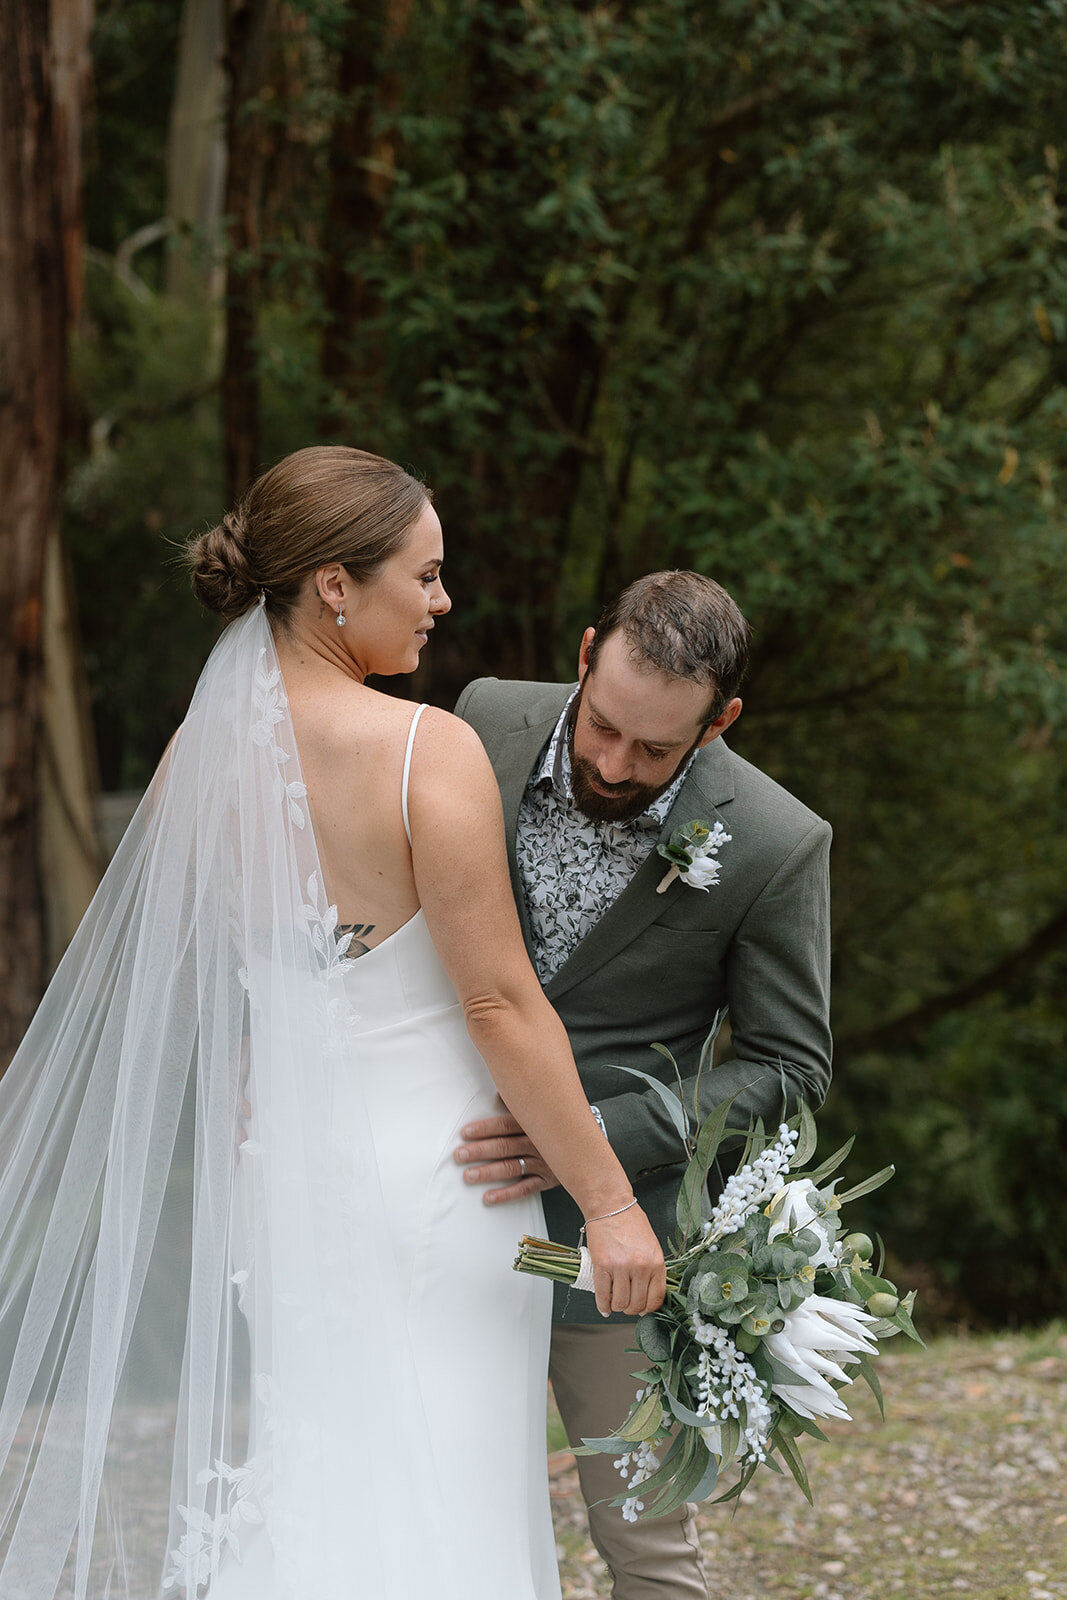 Stacey&Cory-Coast&Pines-60